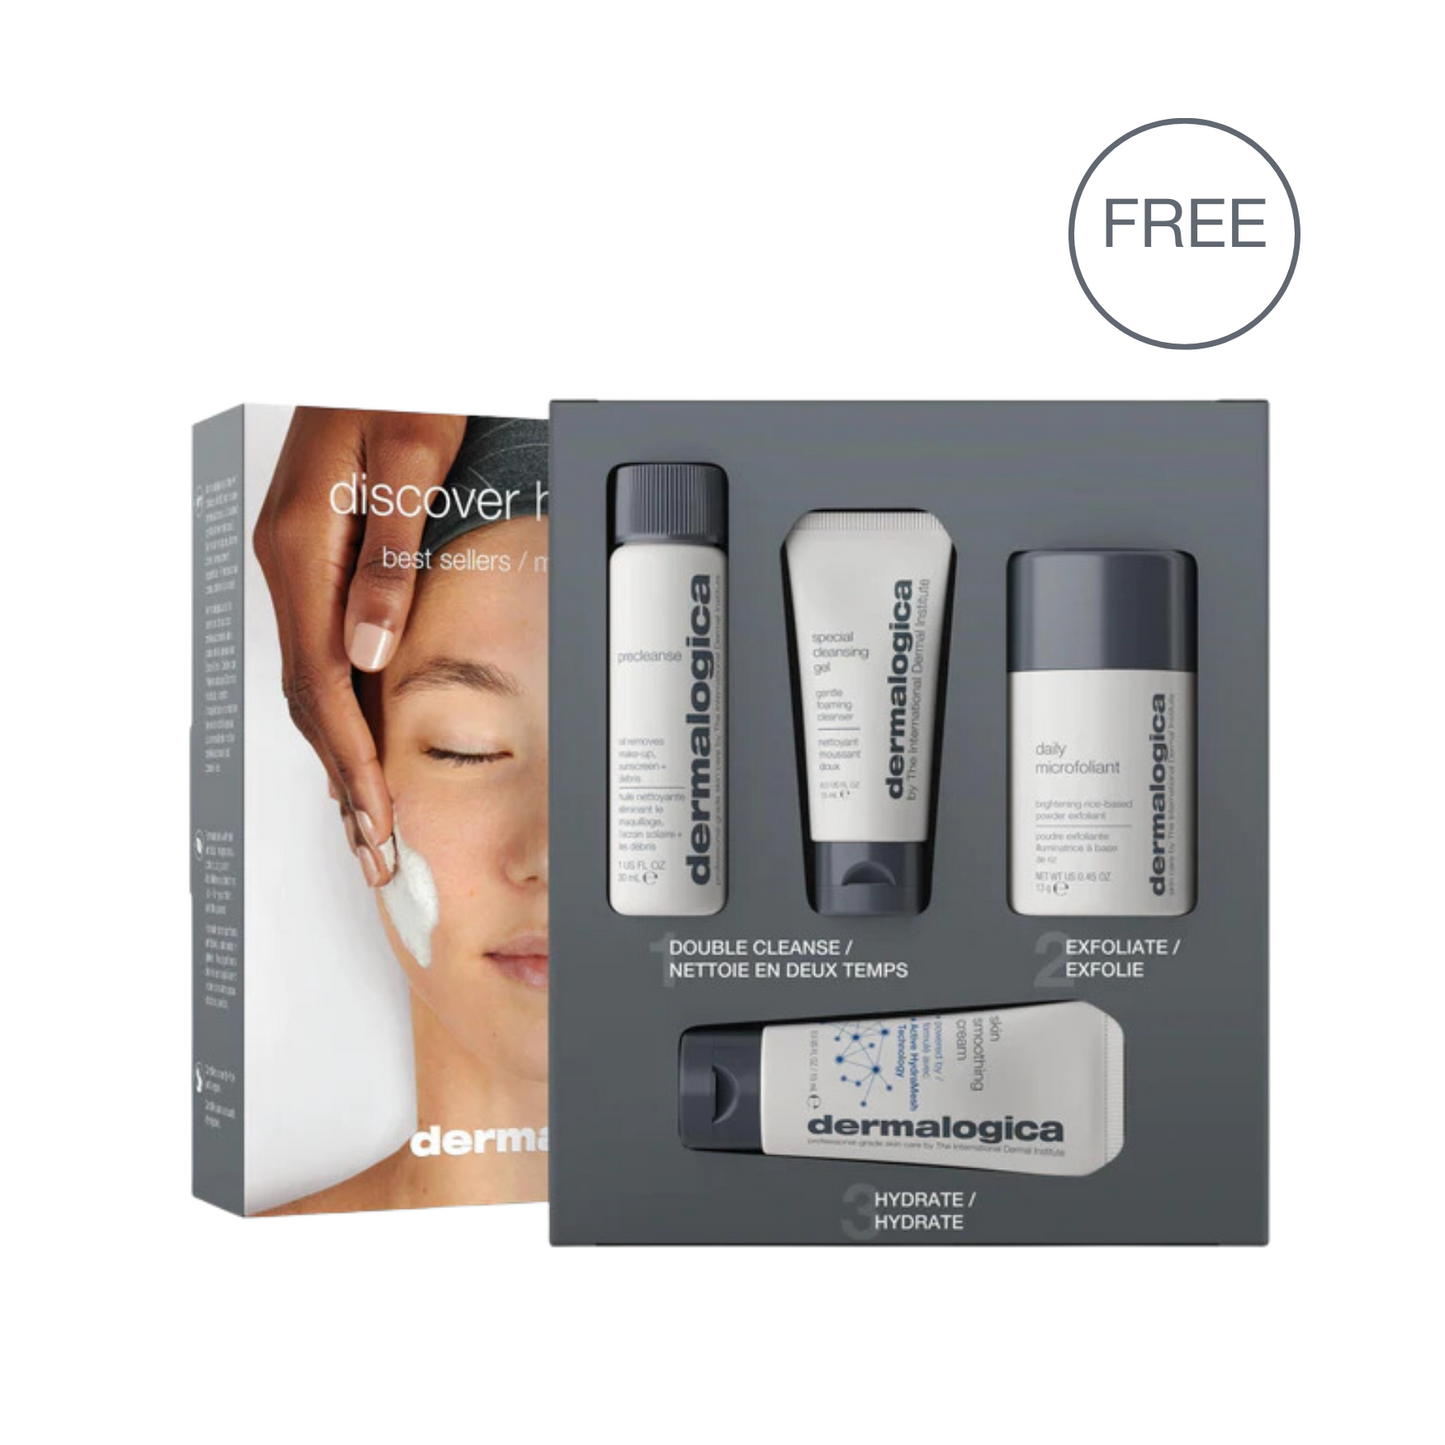 discover healthy skin kit (free gift upon purchase of new innovation)